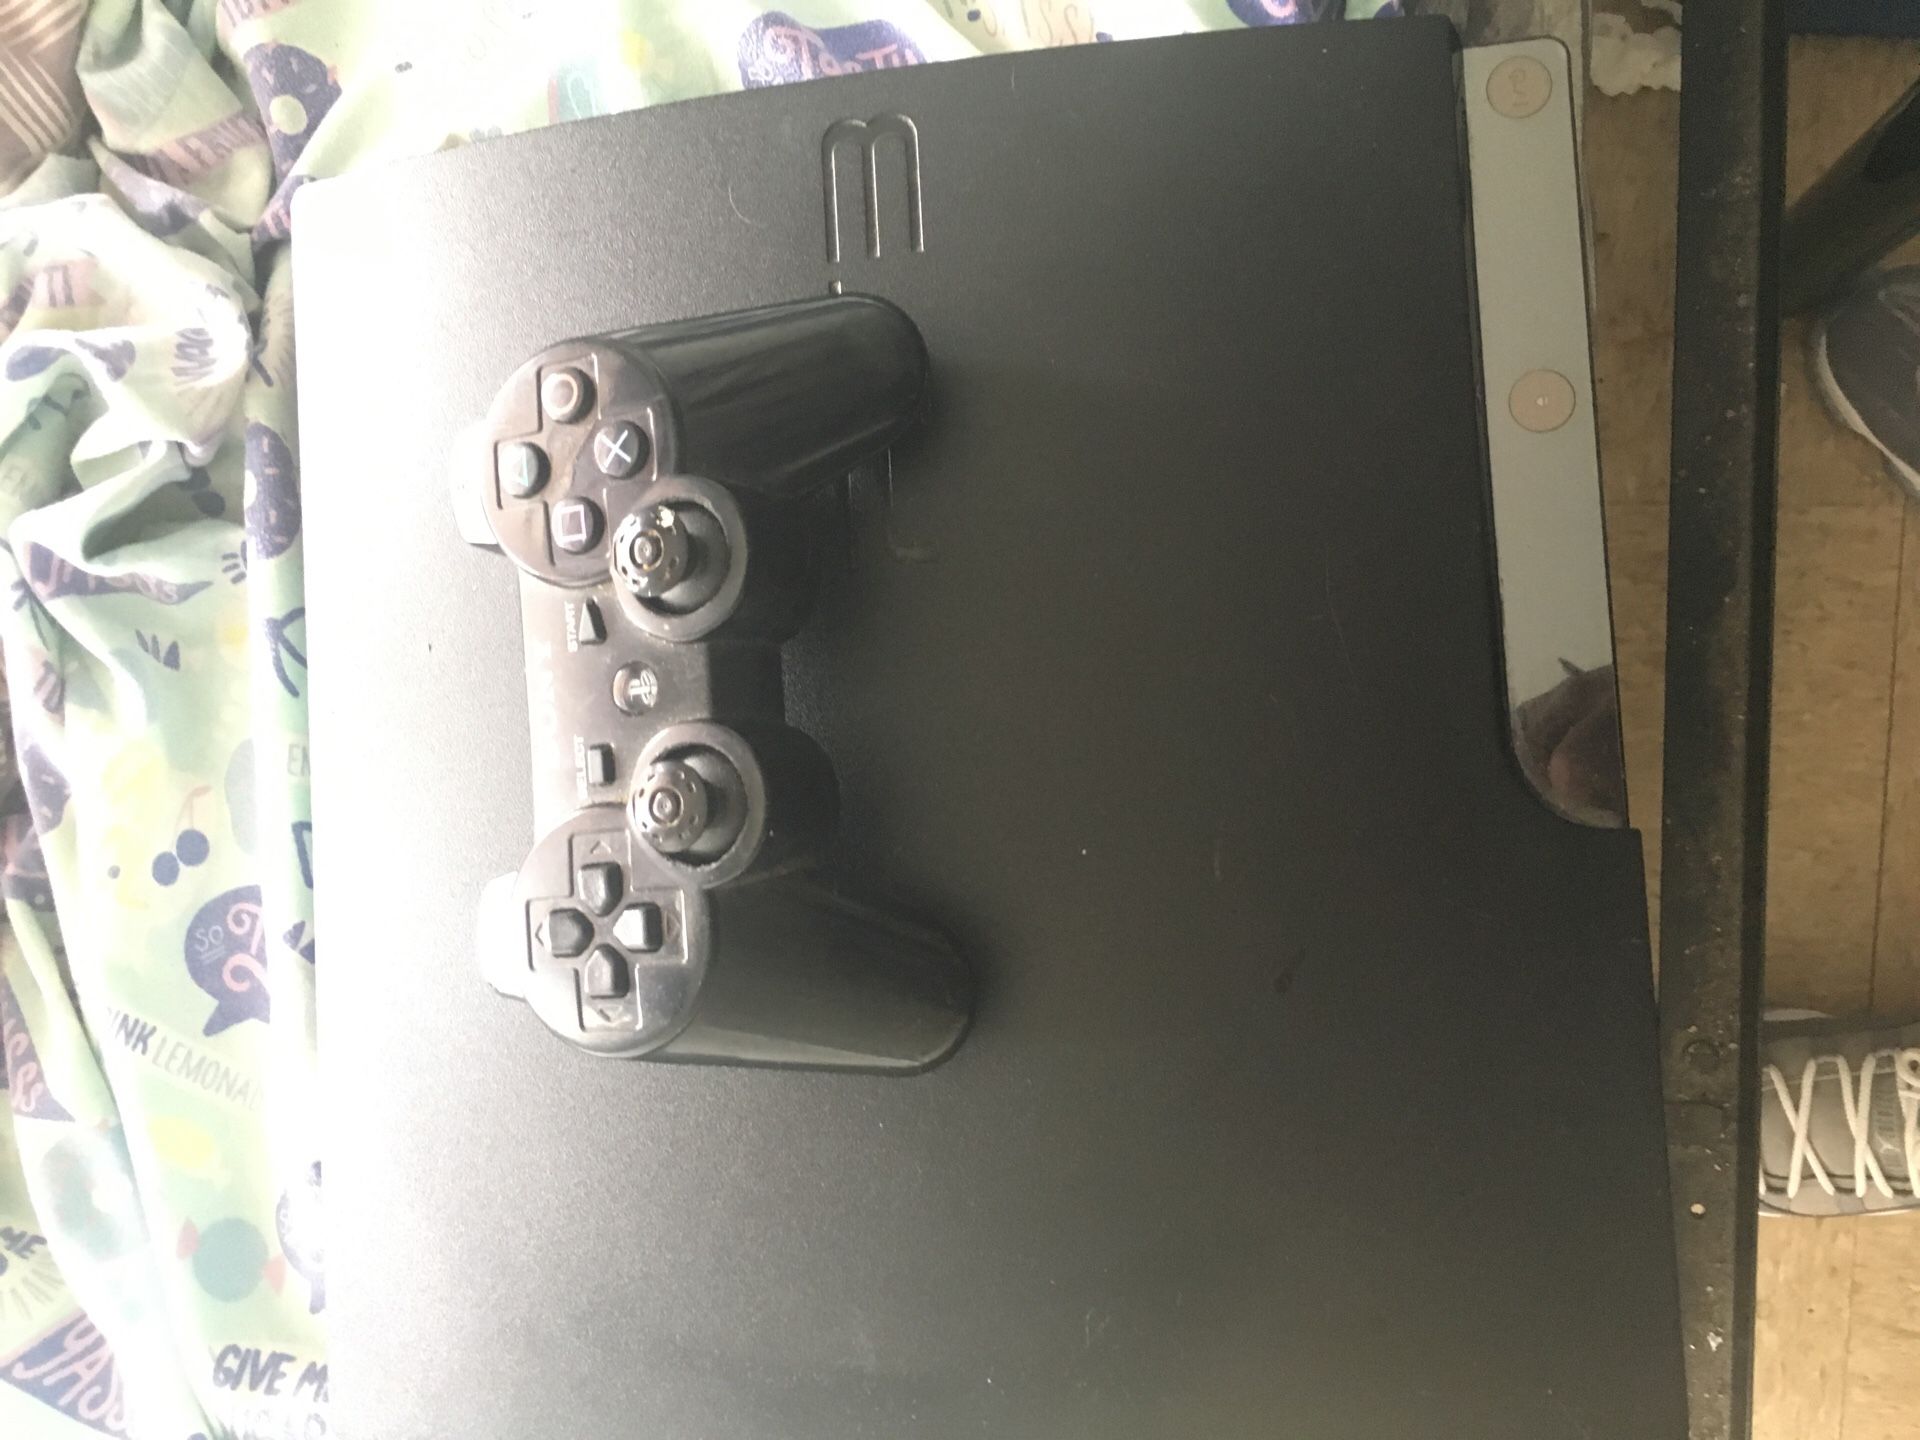 PS3 ready to be picked up